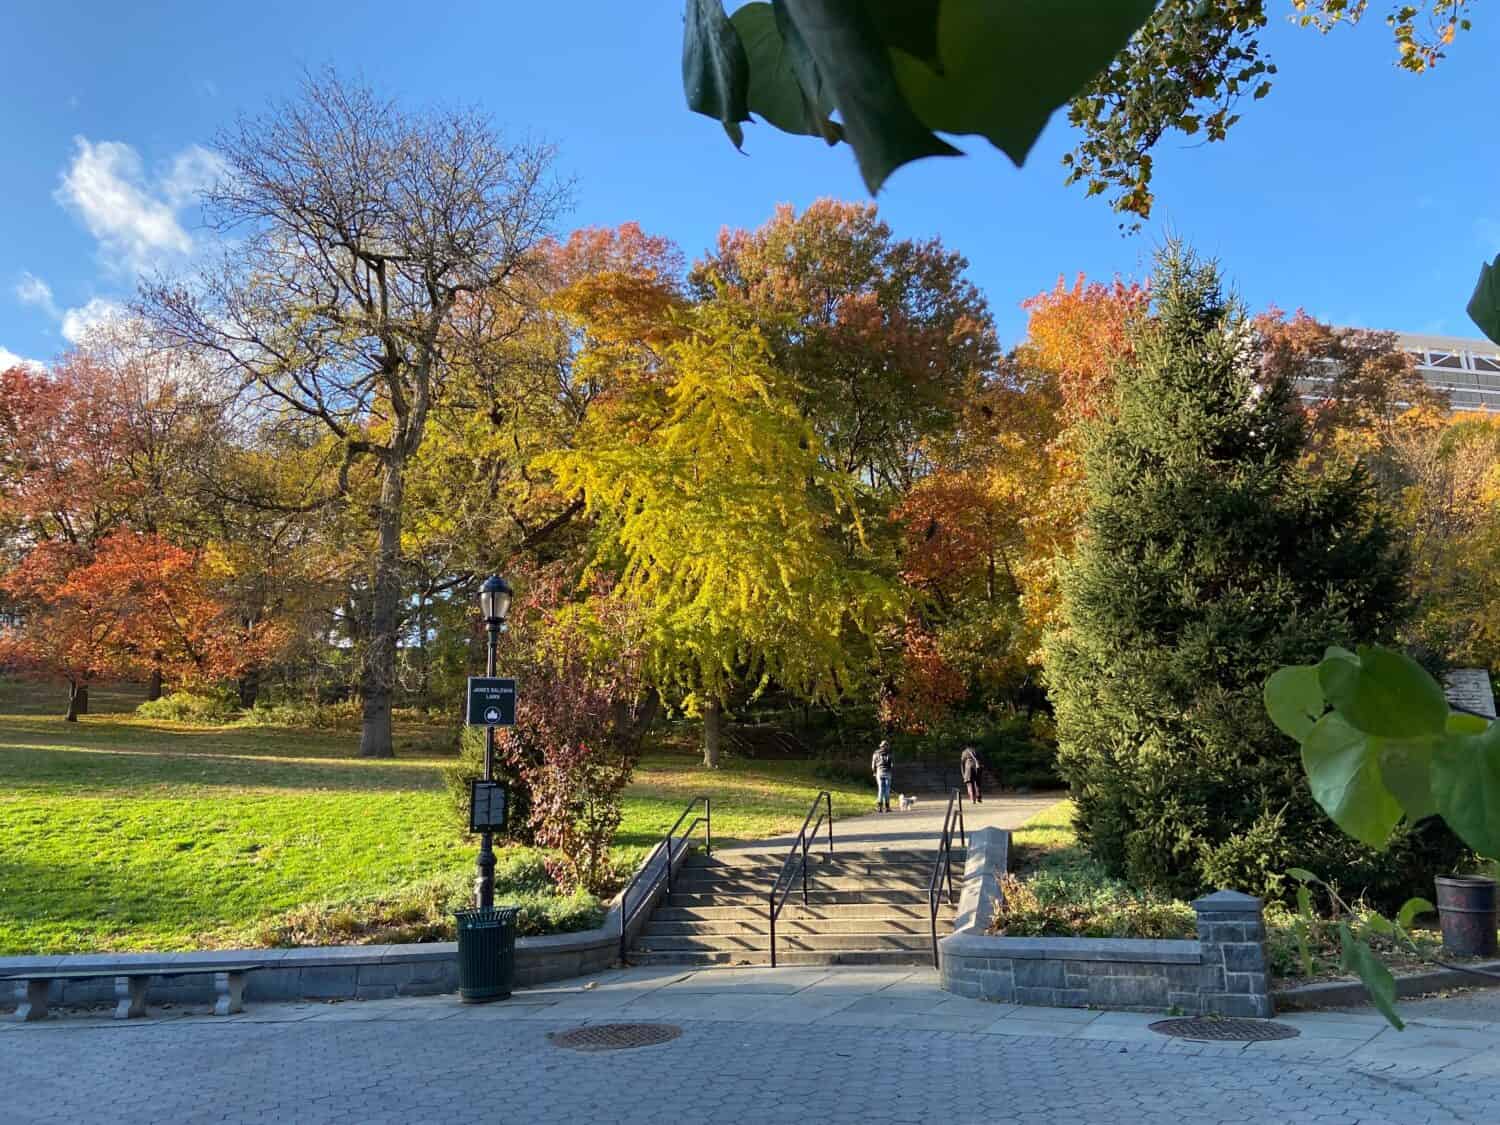 Entrance to St. Nicholas Park at 135th Street and St. Nicholas Avenue in Harlem in the fall